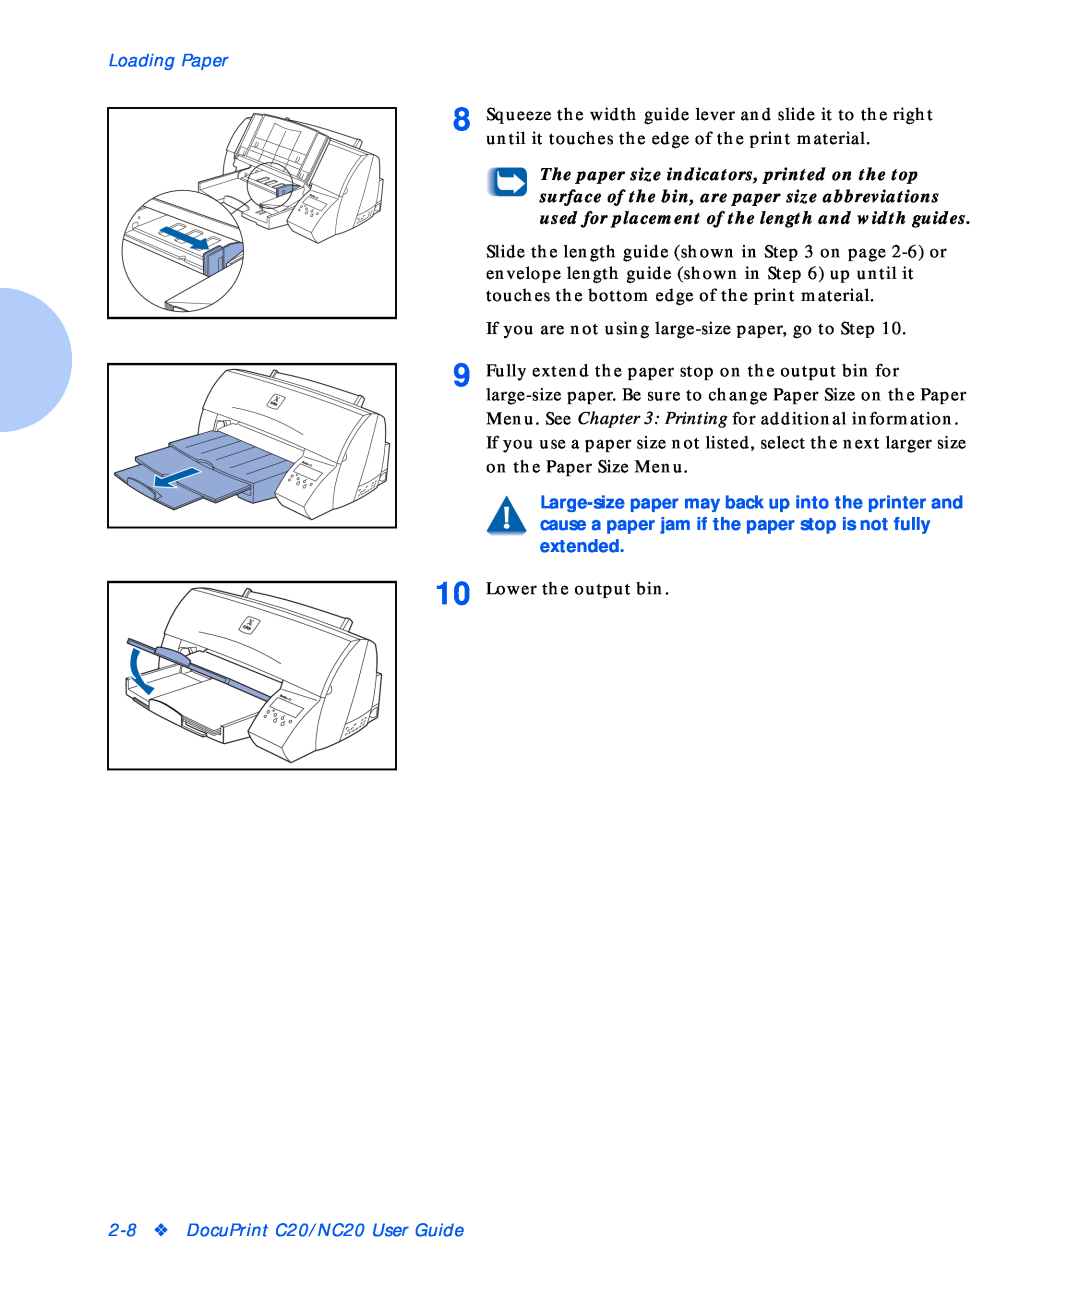 Xerox manual Loading Paper, If you are not using large-size paper, go to Step, DocuPrint C20/NC20 User Guide 